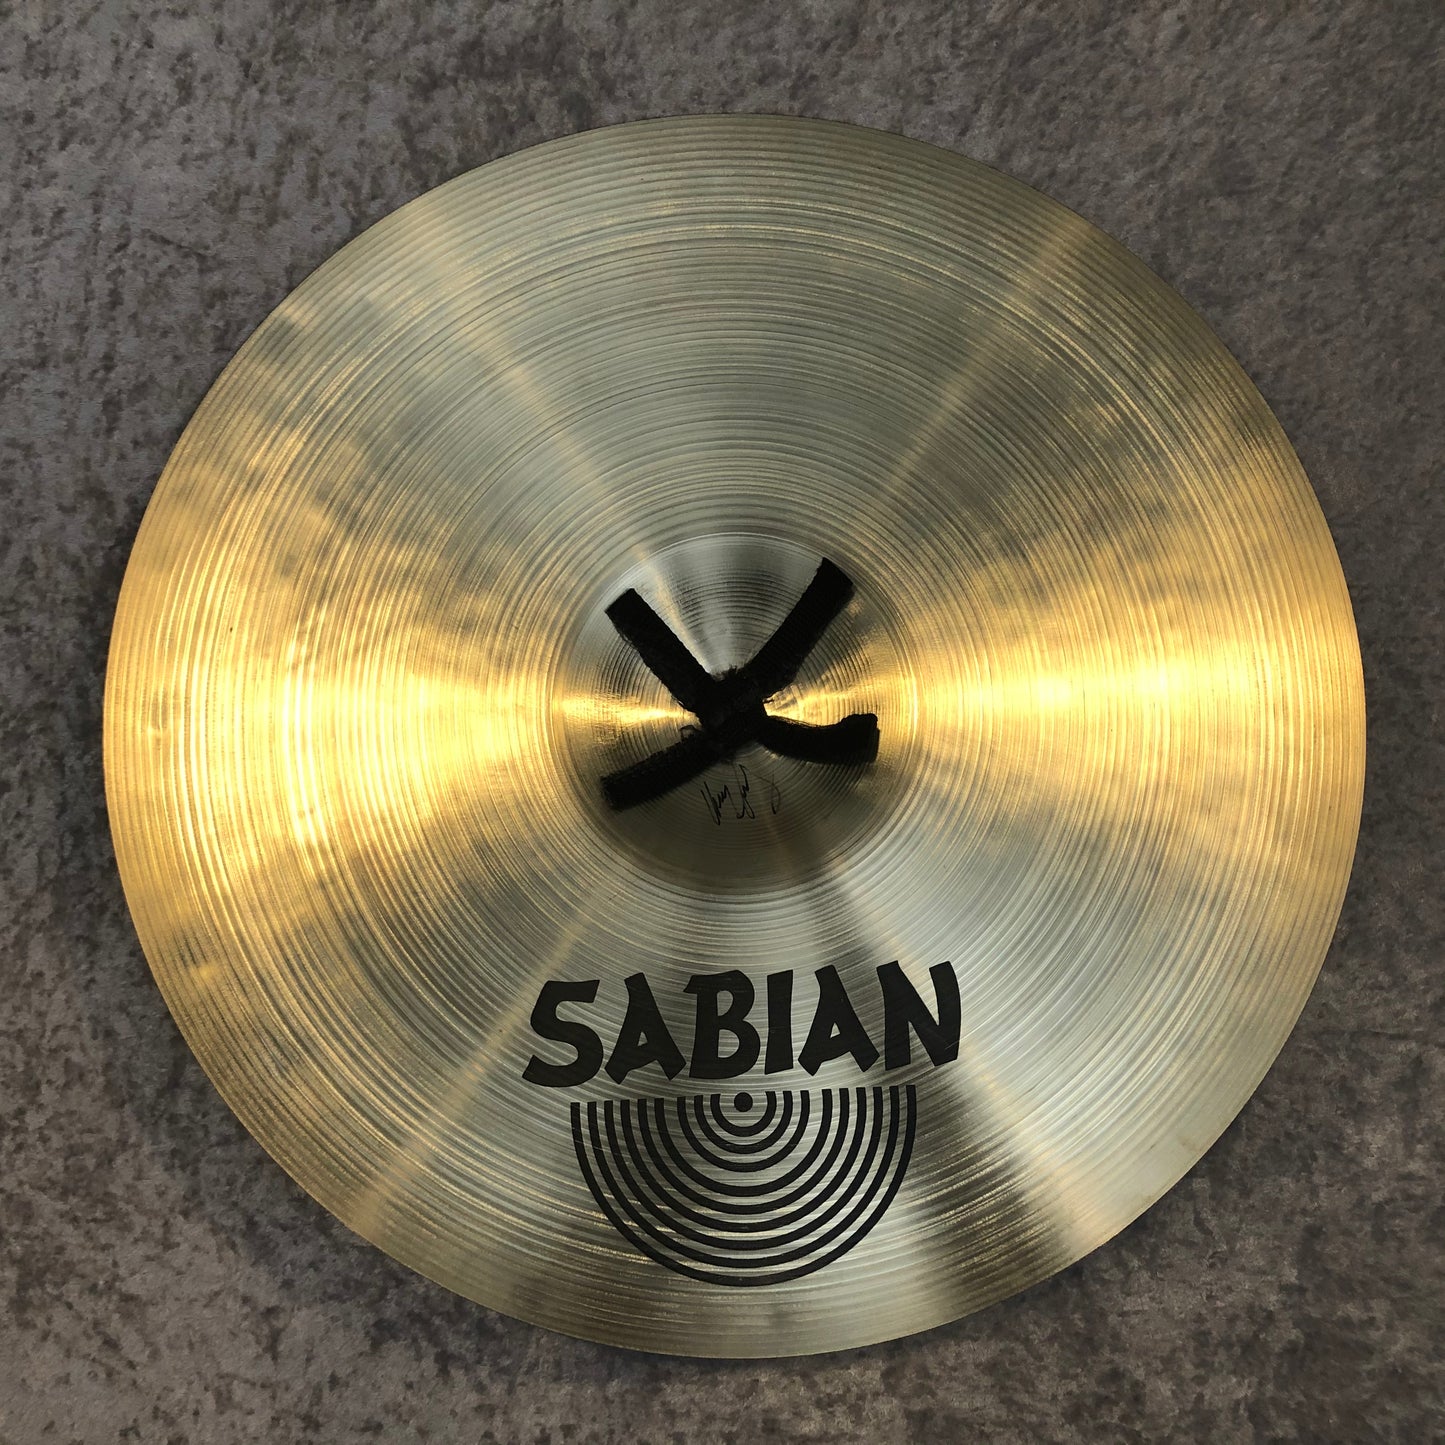 17" Sabian Hand Hammered HH Germanic Orchestral Cymbals (Pair)